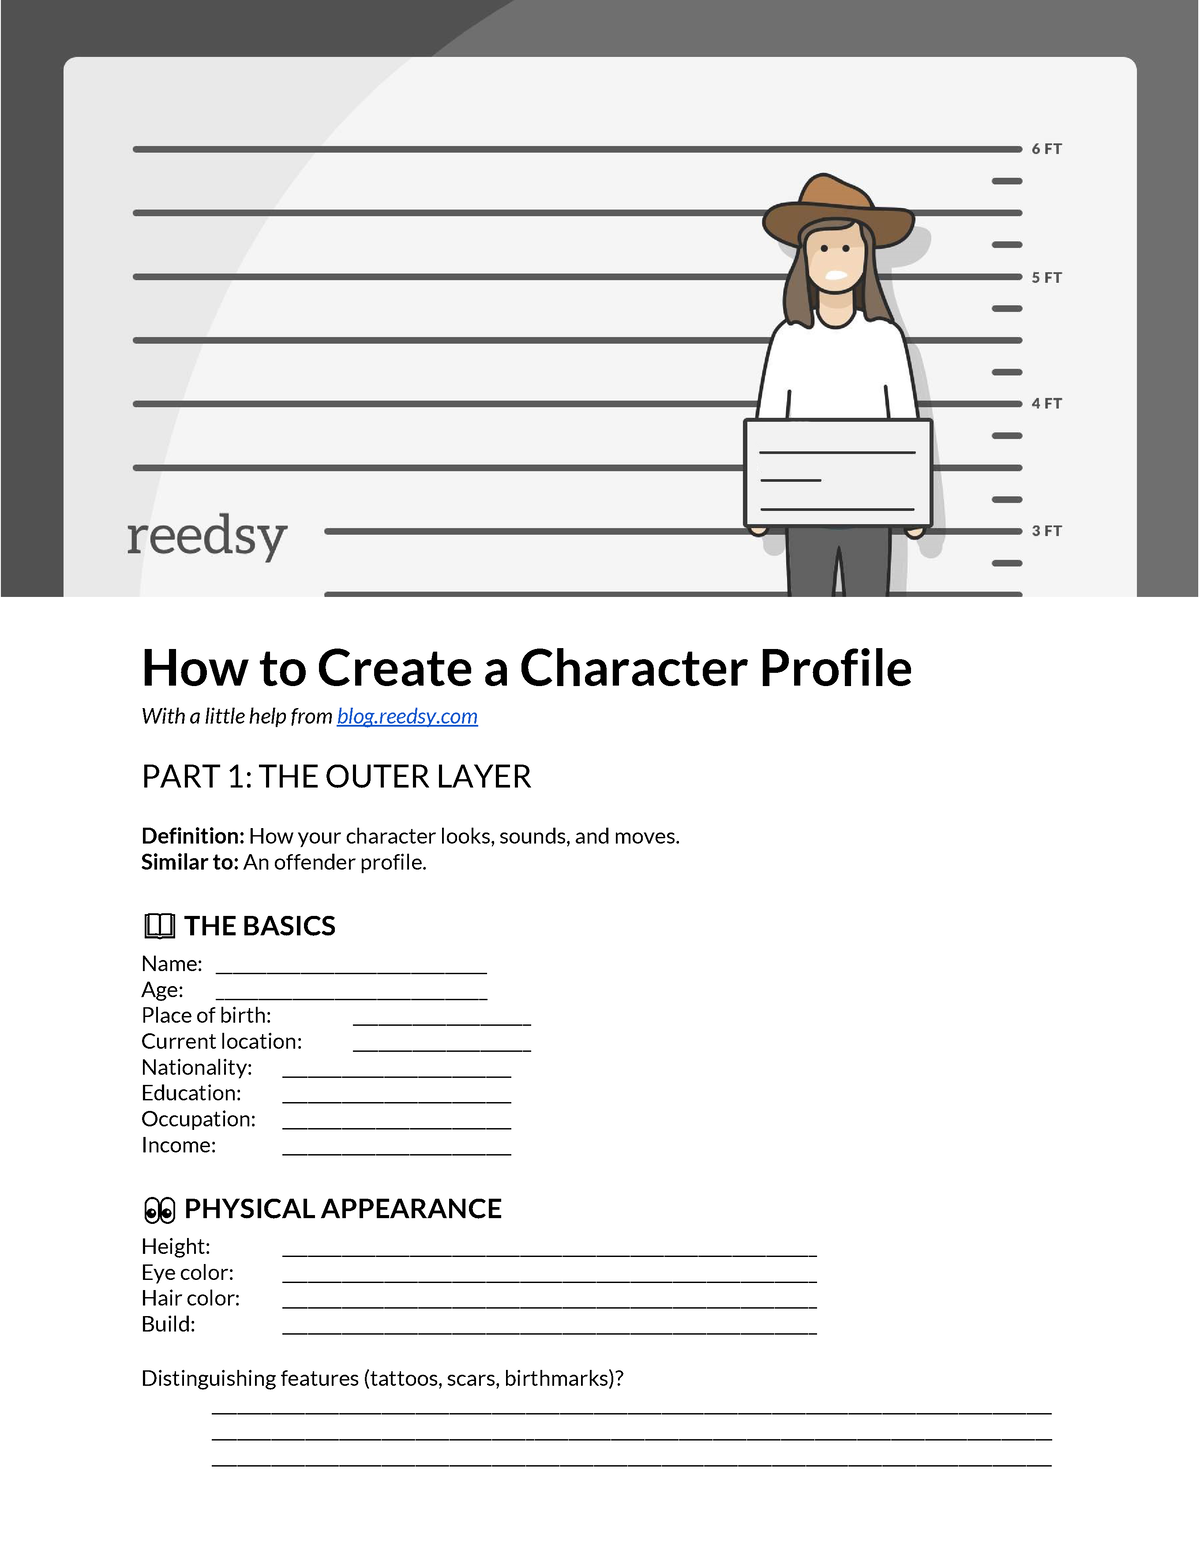 reedsy-character-profile-template-how-to-create-a-character-profile